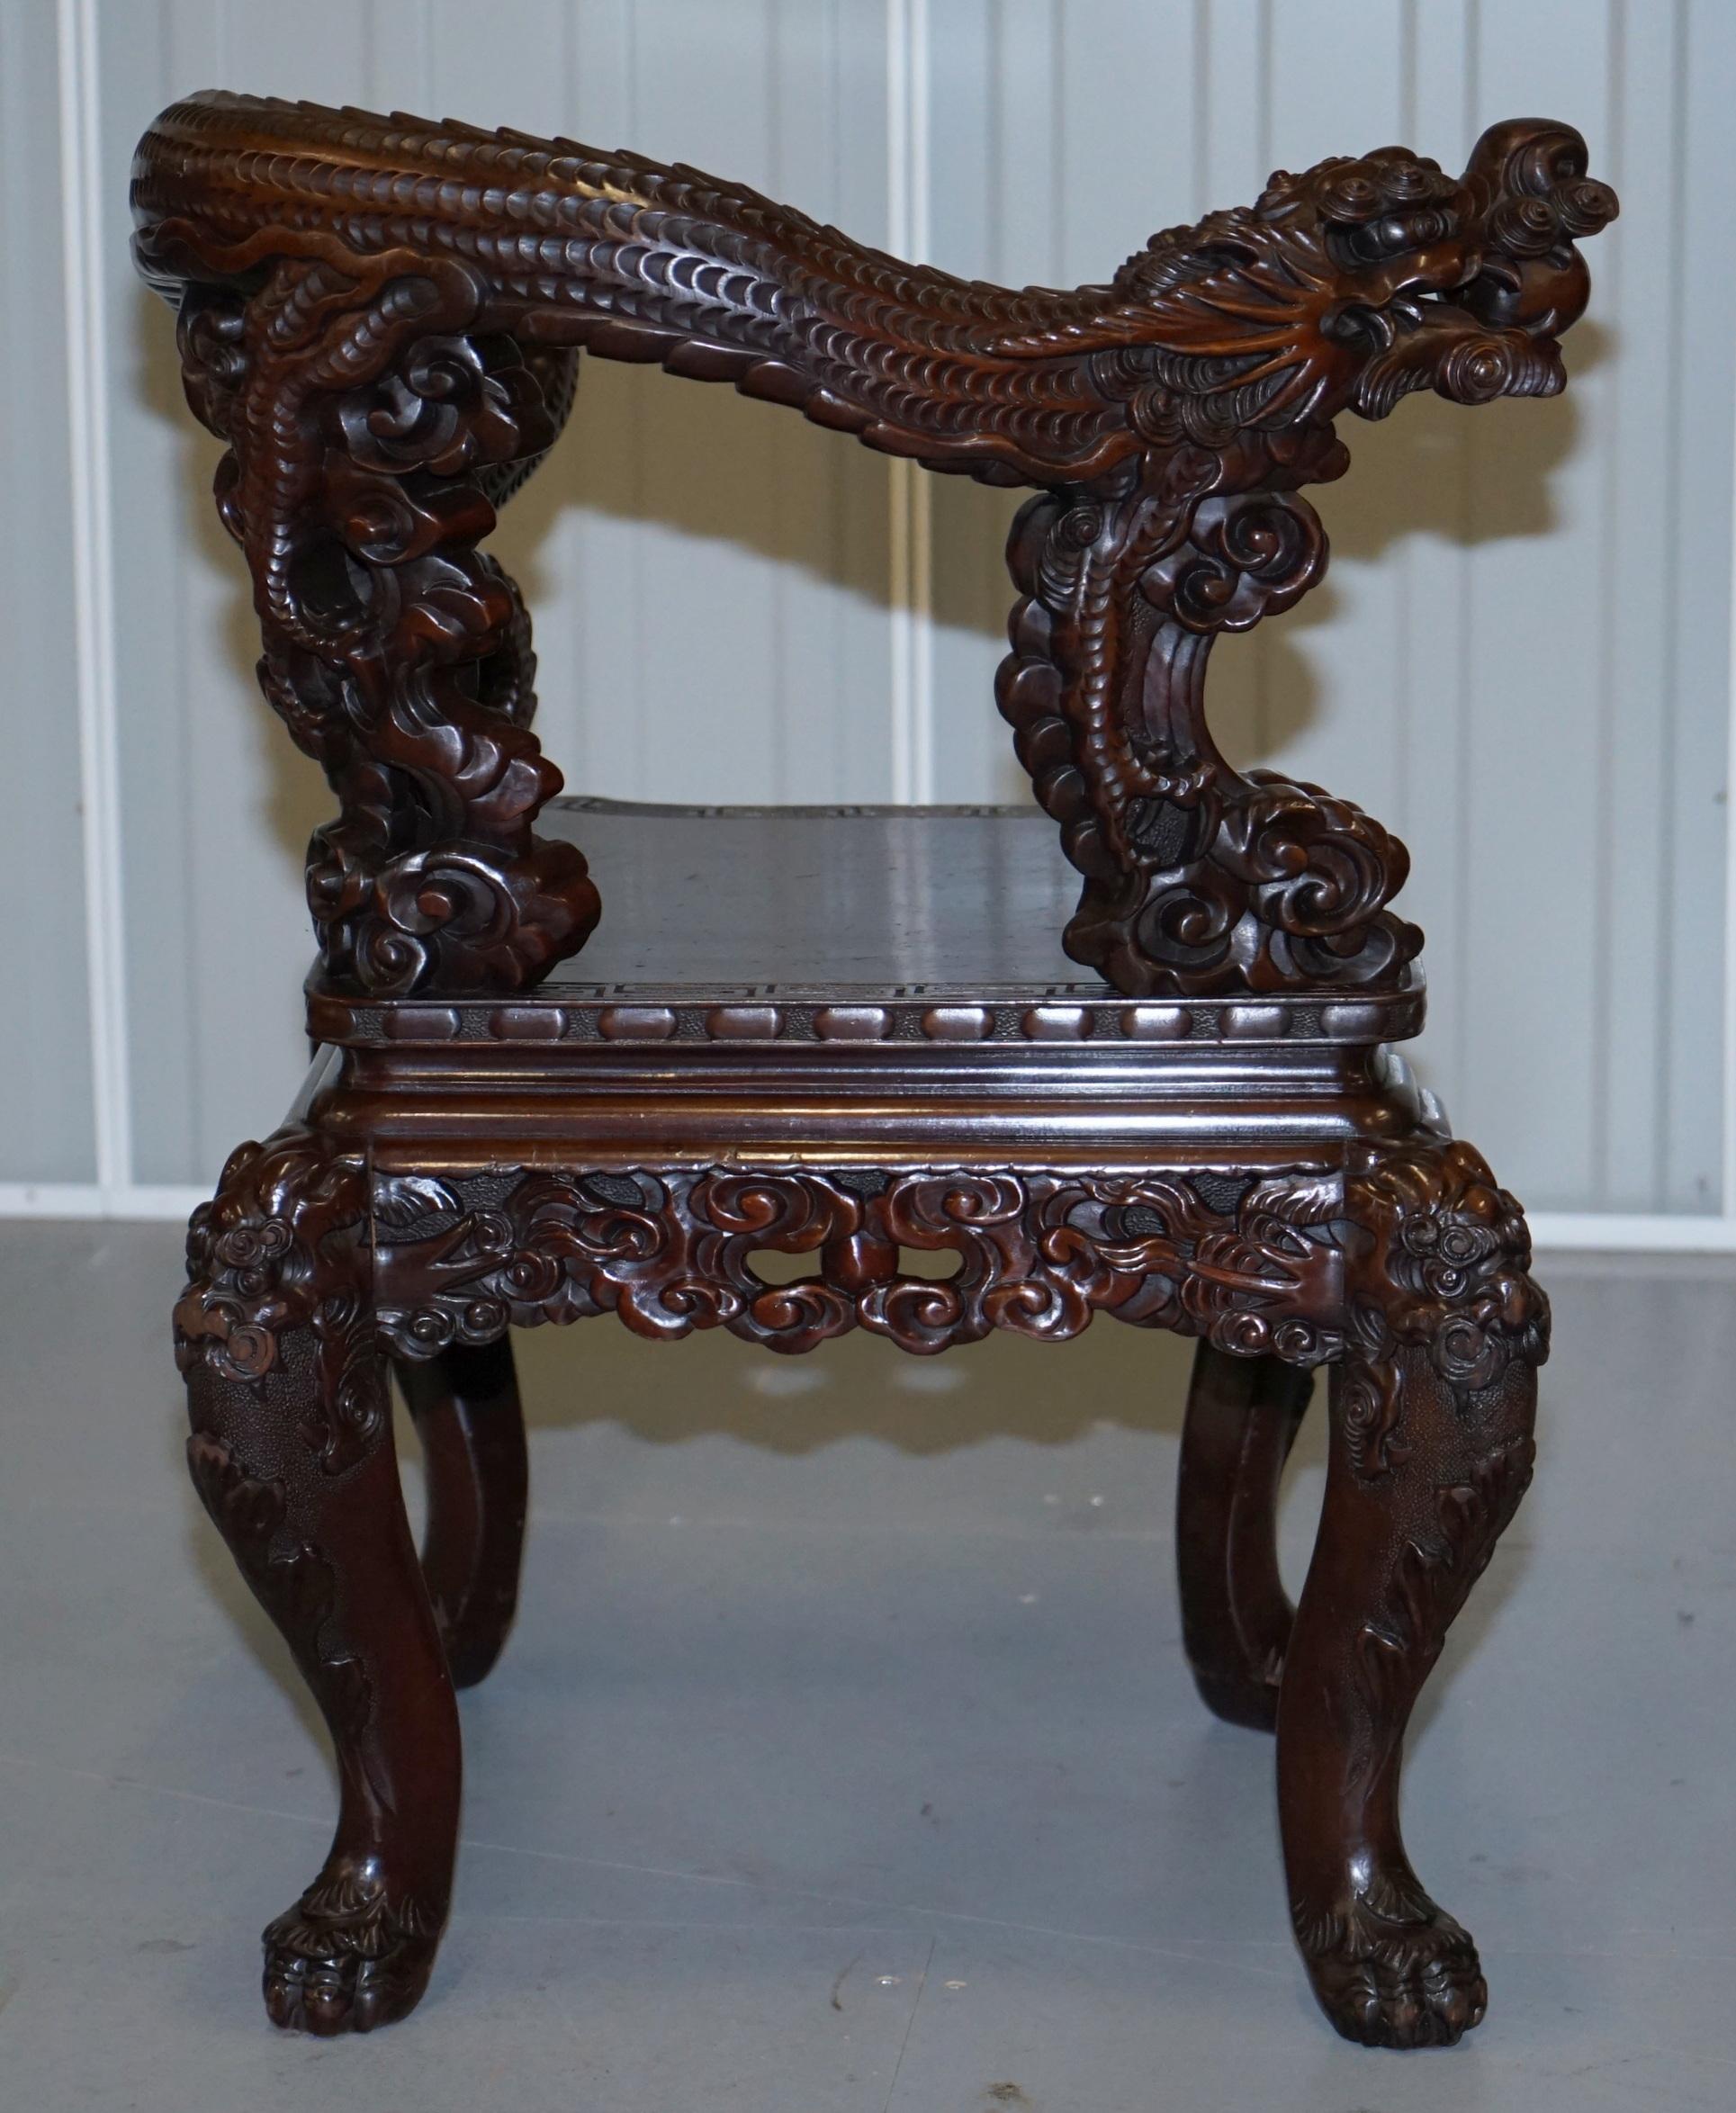 Stamped Japanese circa 1880 Qing Dynasty Carved Hardwood Dragon Corner Armchair For Sale 6